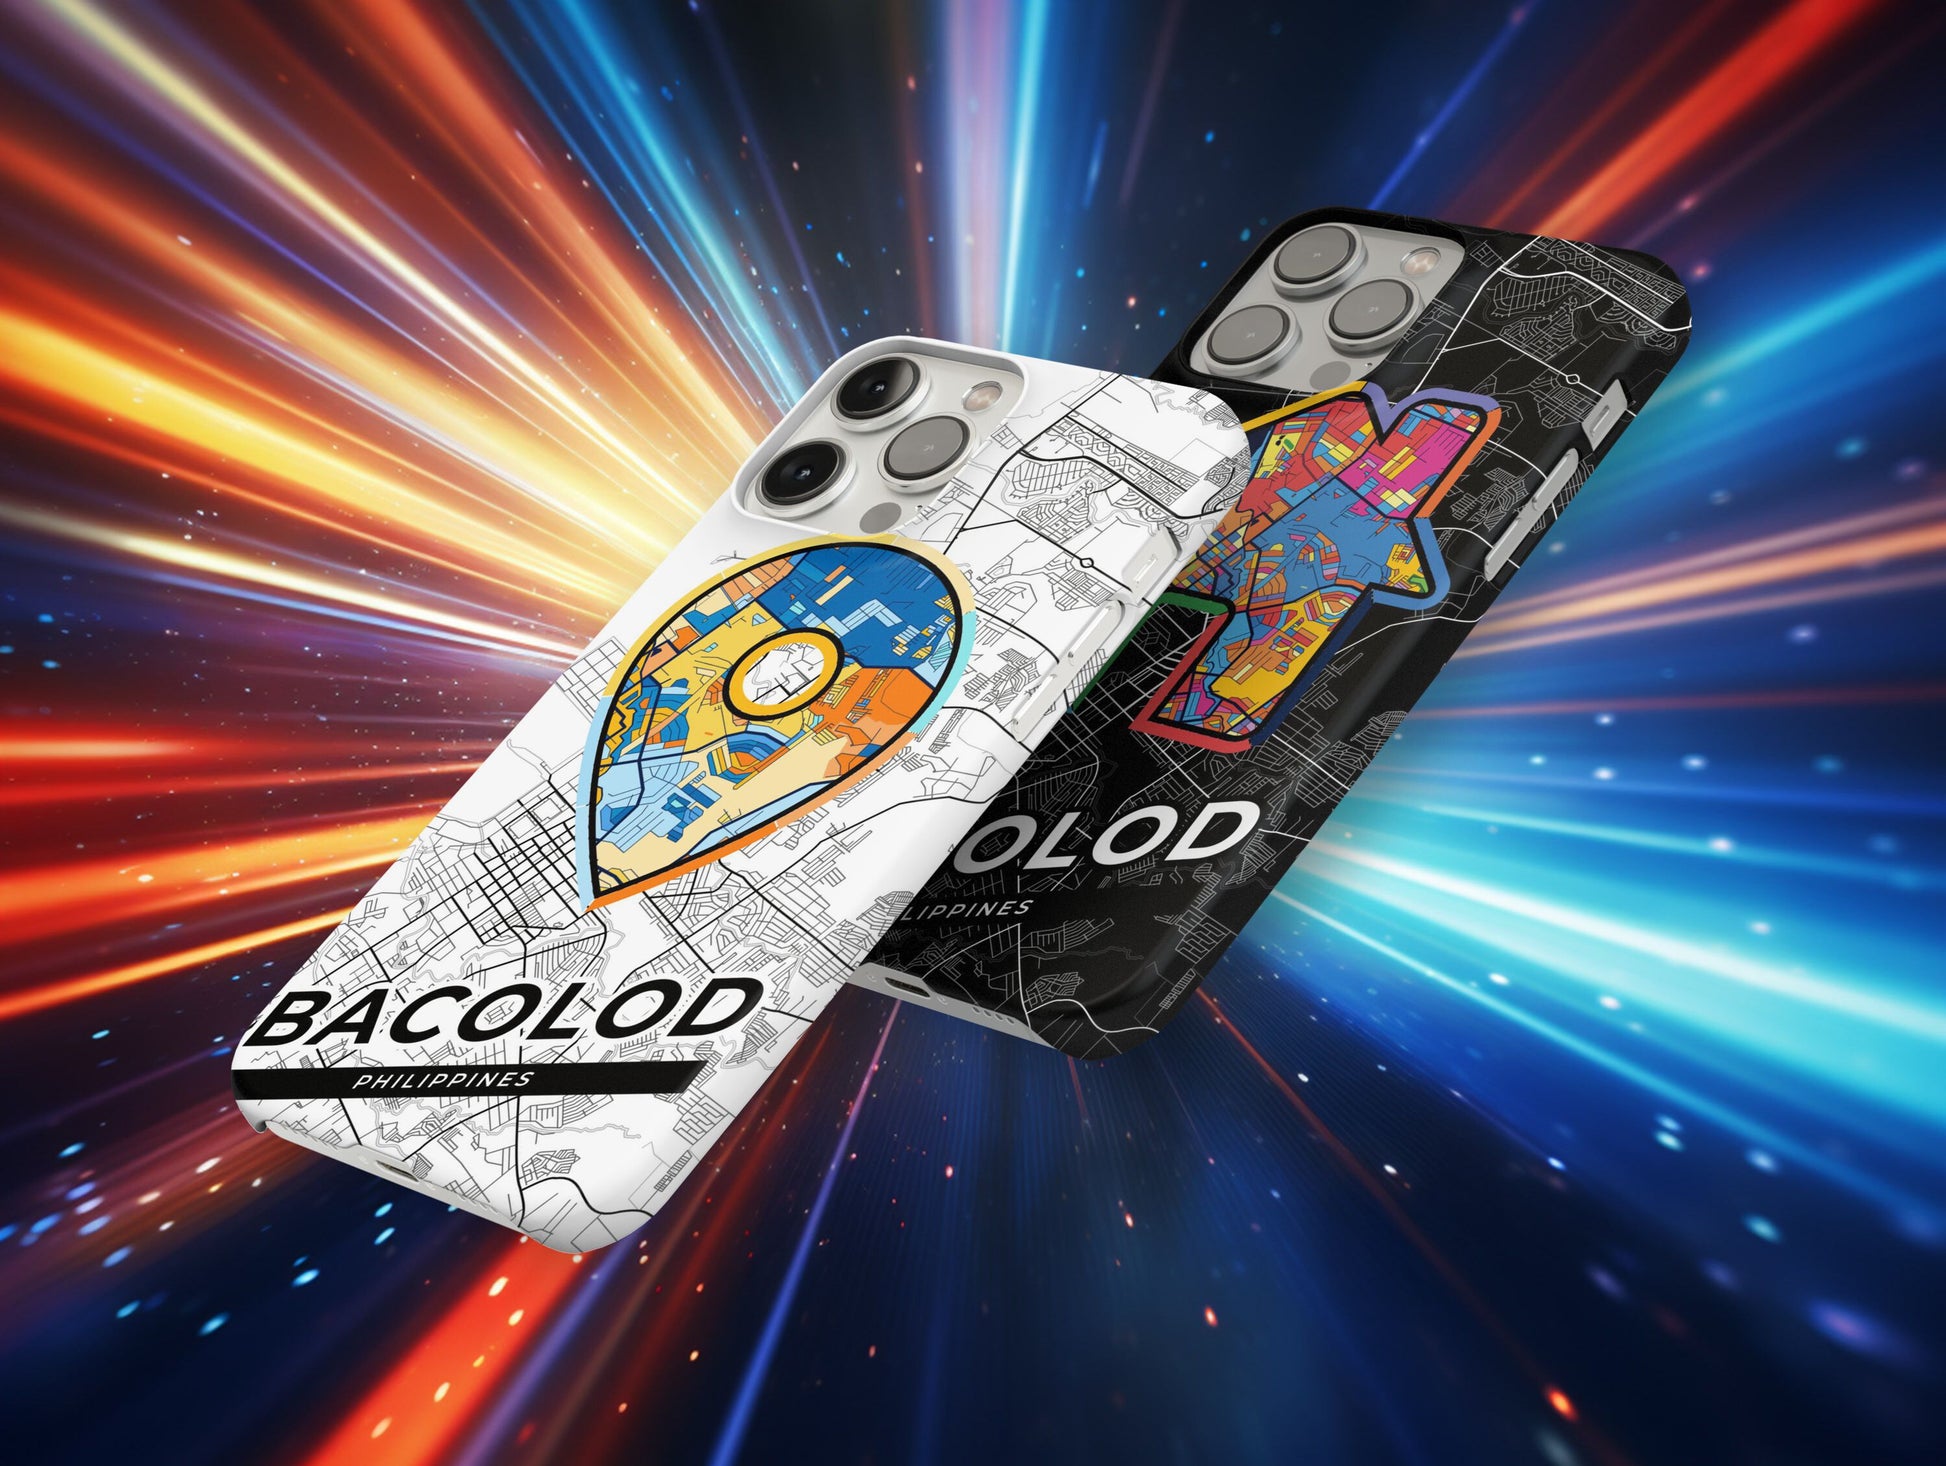 Bacolod Philippines slim phone case with colorful icon. Birthday, wedding or housewarming gift. Couple match cases.